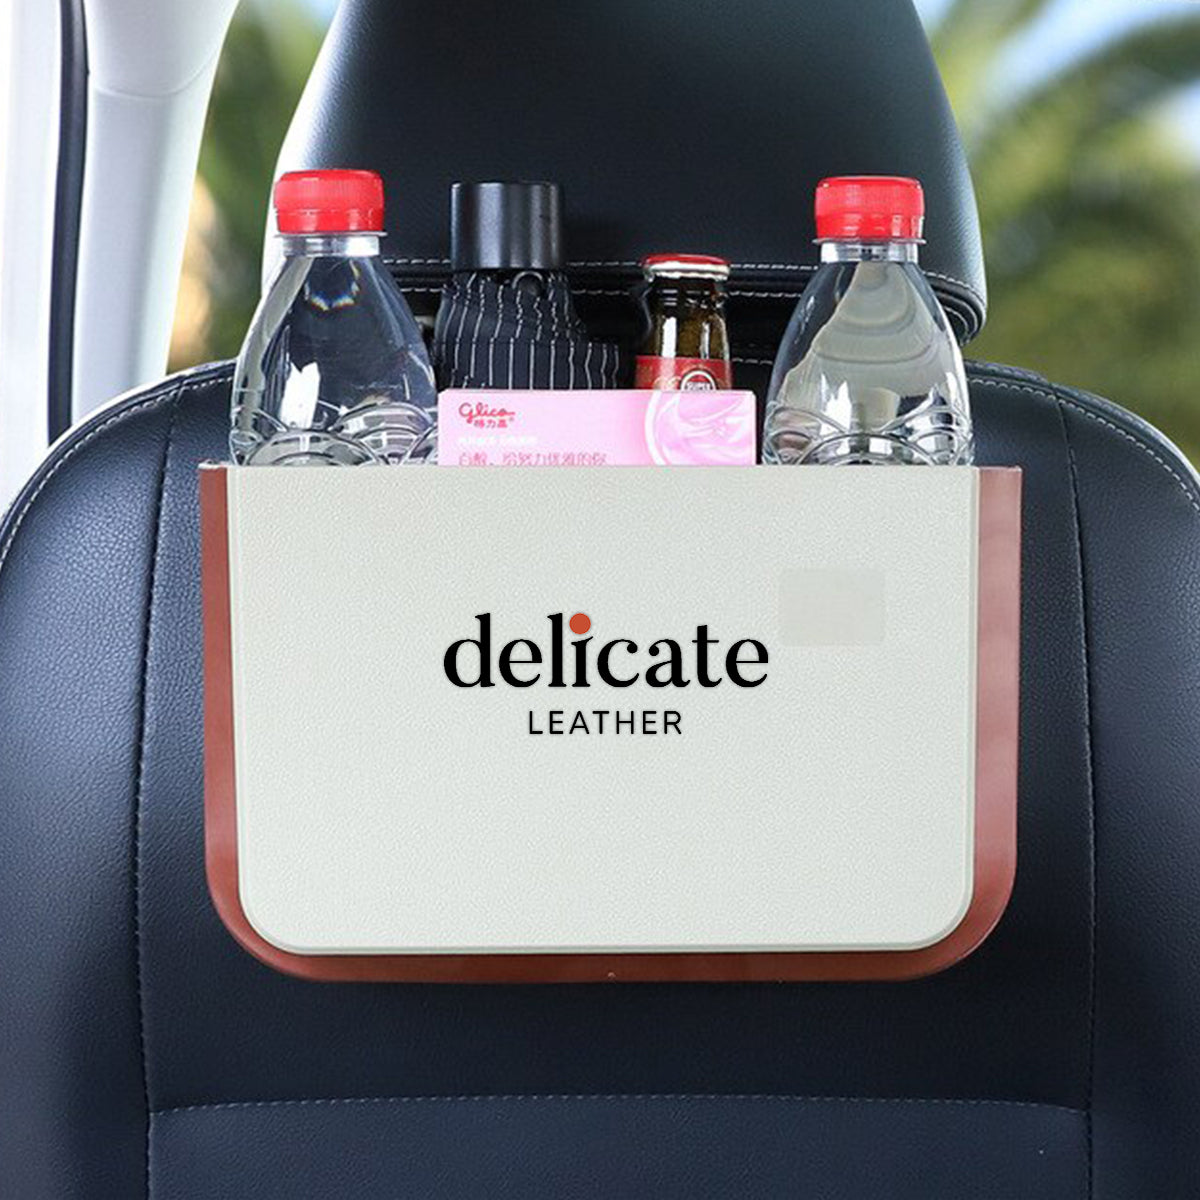 Hanging Waterproof Car Trash can-Foldable, Custom For Your Cars, Waterproof, and Equipped with Cup Holders and Trays. Multi-Purpose, Car Accessories HA11992 - Delicate Leather